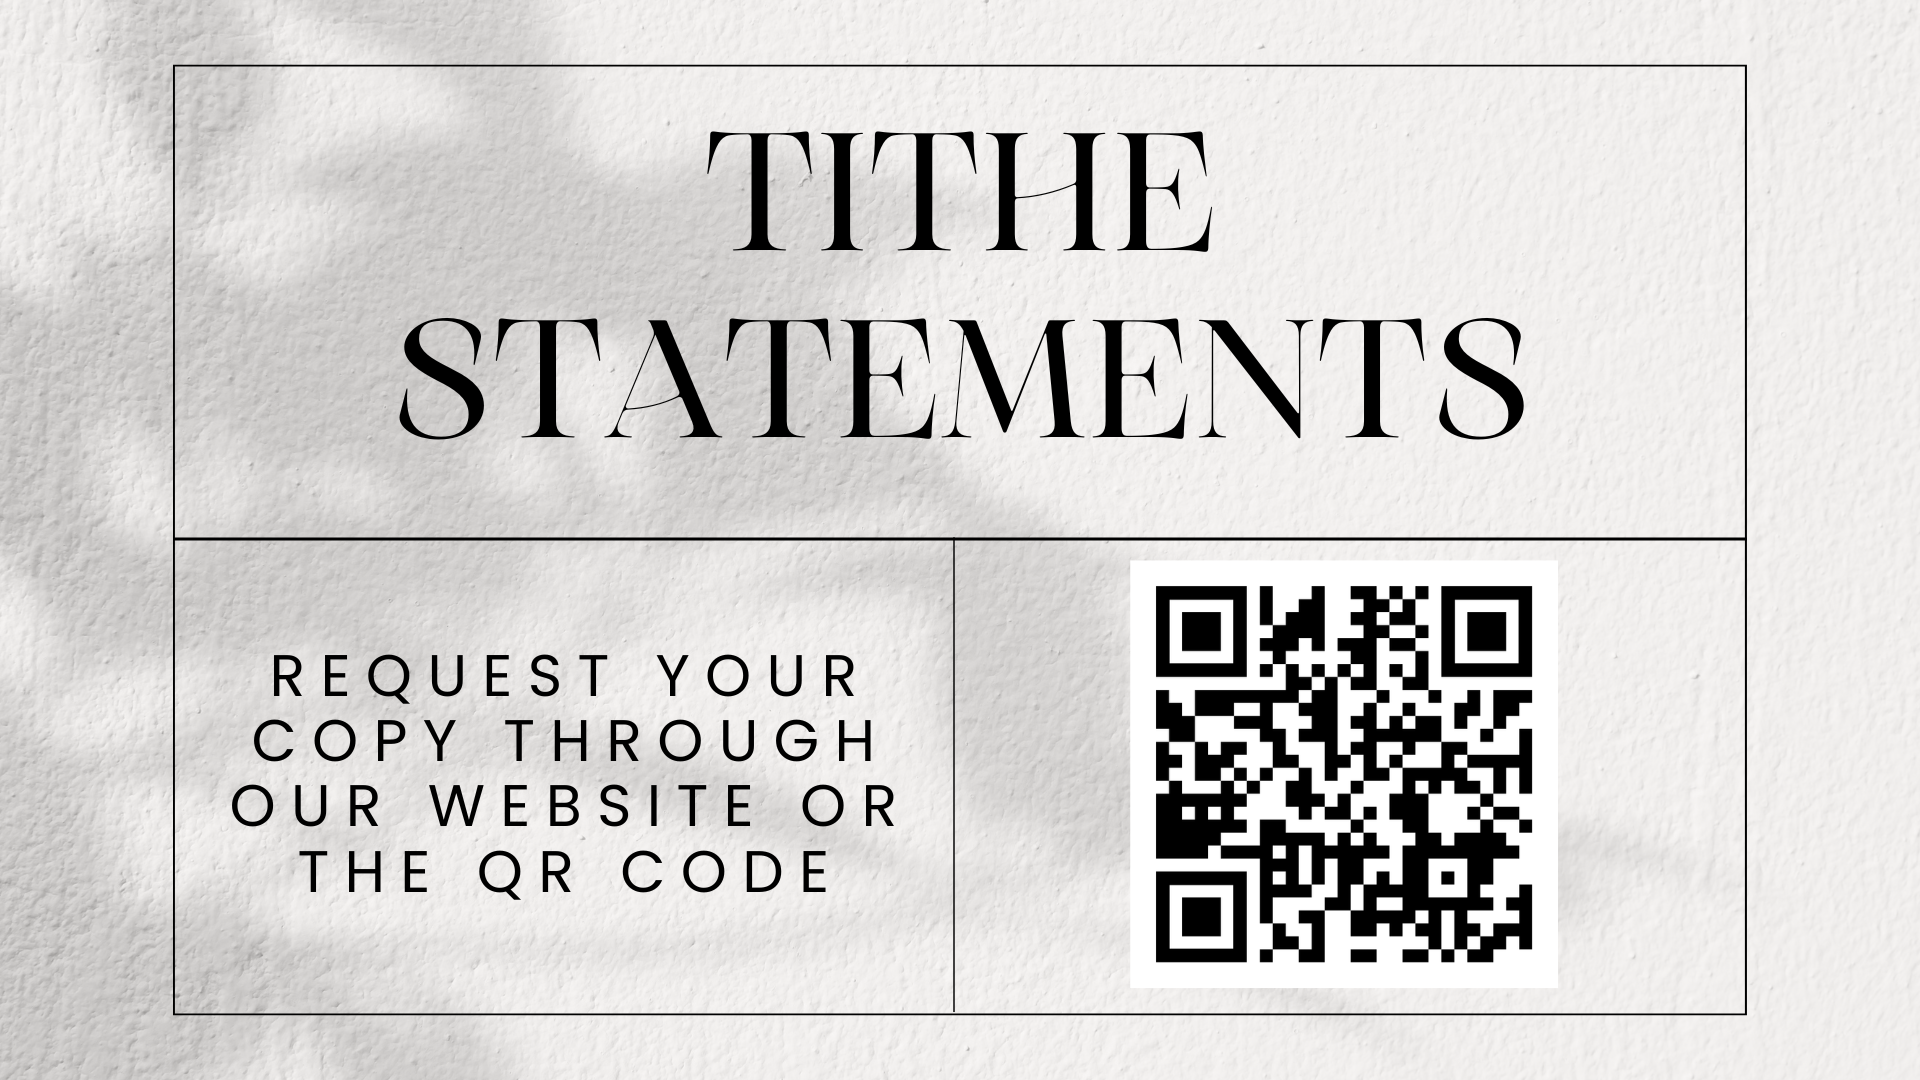 Tithe Statements.png